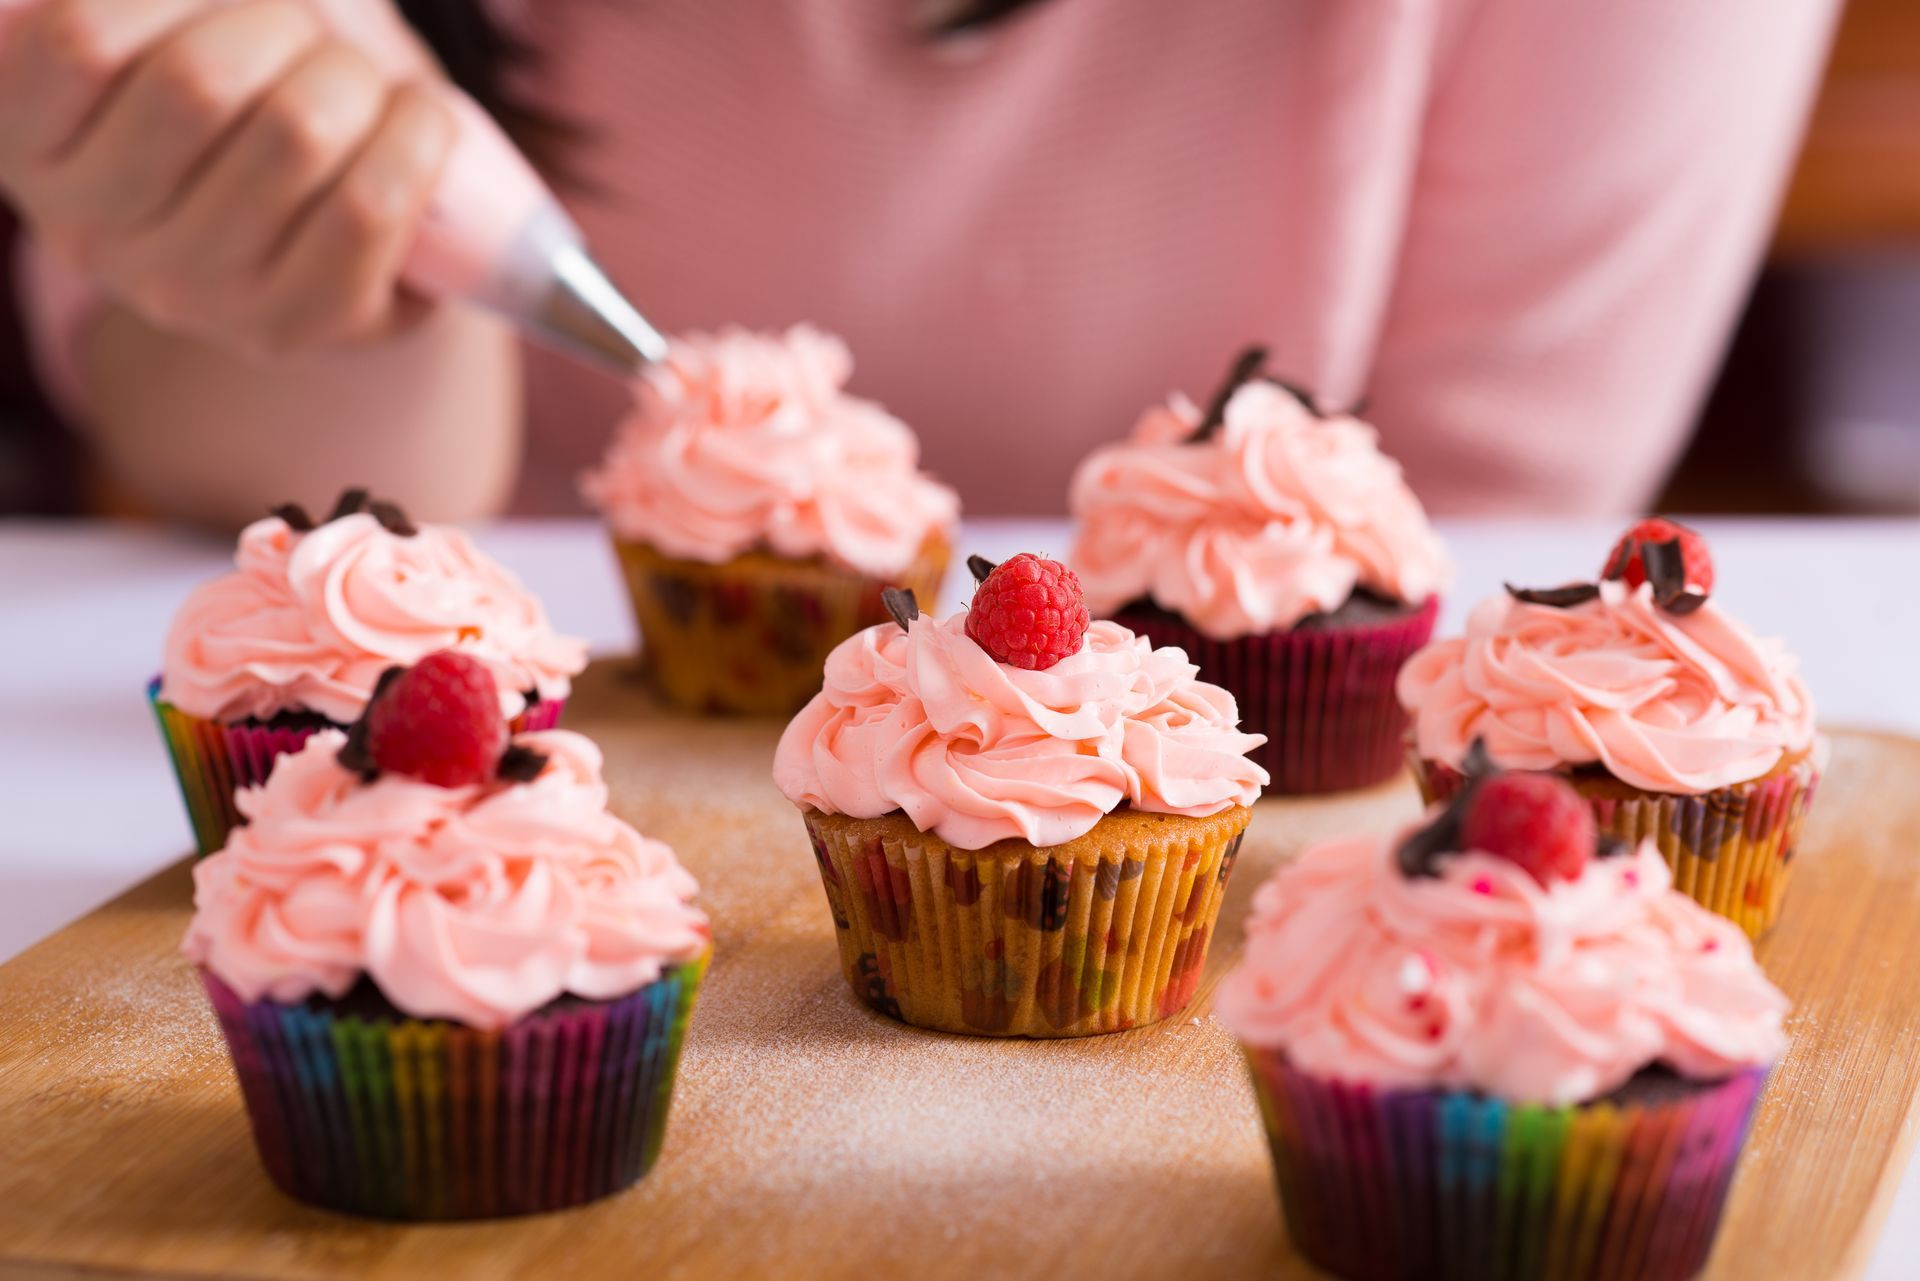 a woman decorates cupcakes with pink frosting and raspberries